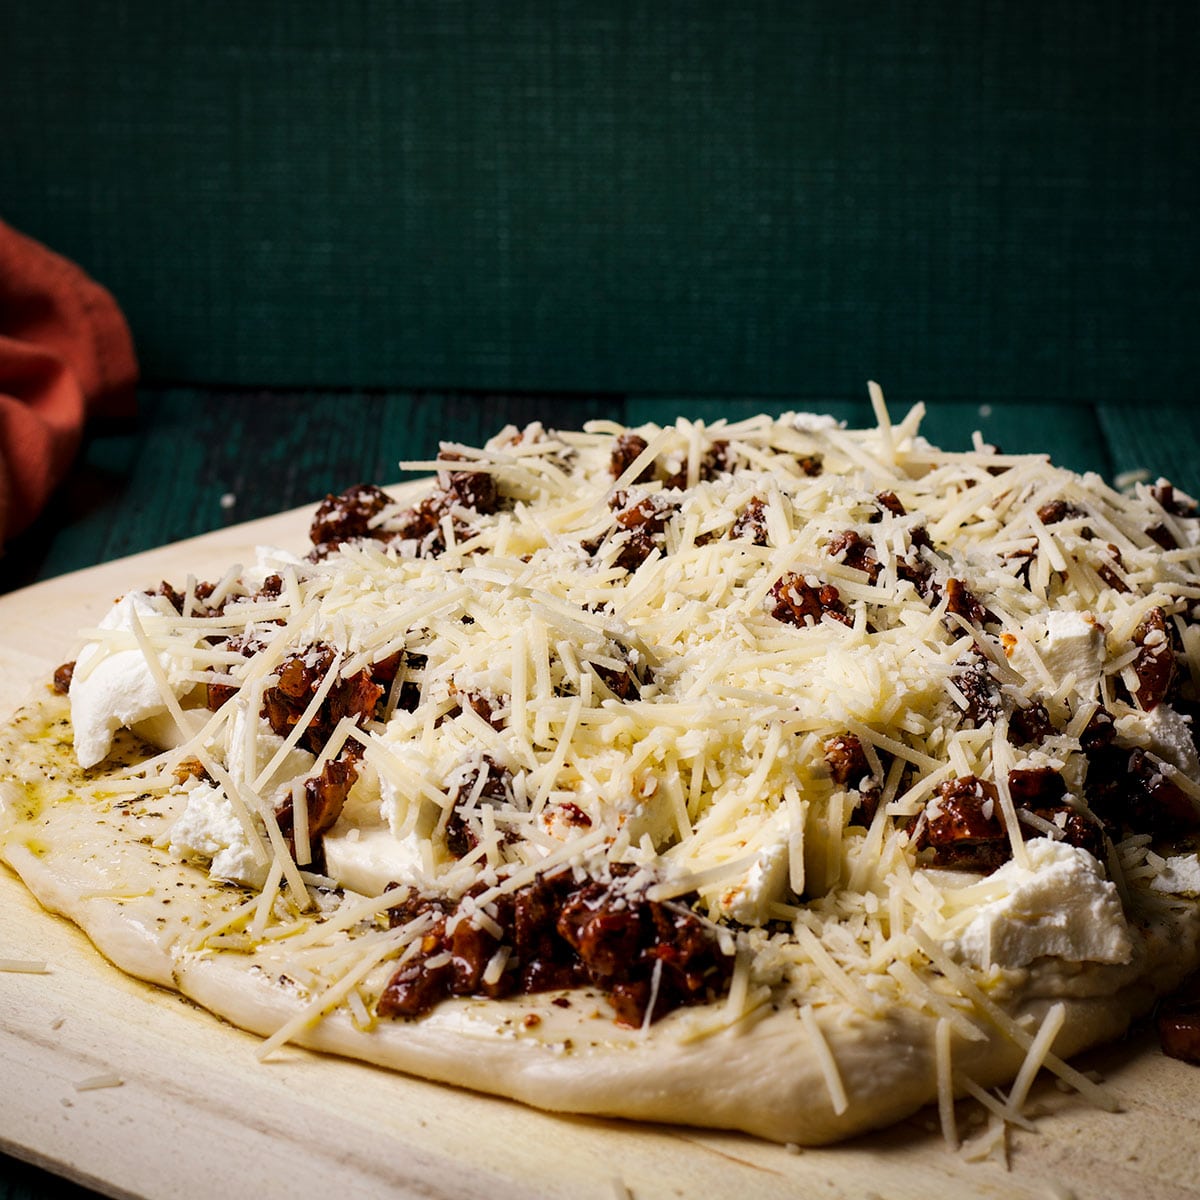 Sprinkle grated or shredded parmesan cheese over the mushroom ragu on the pizza.